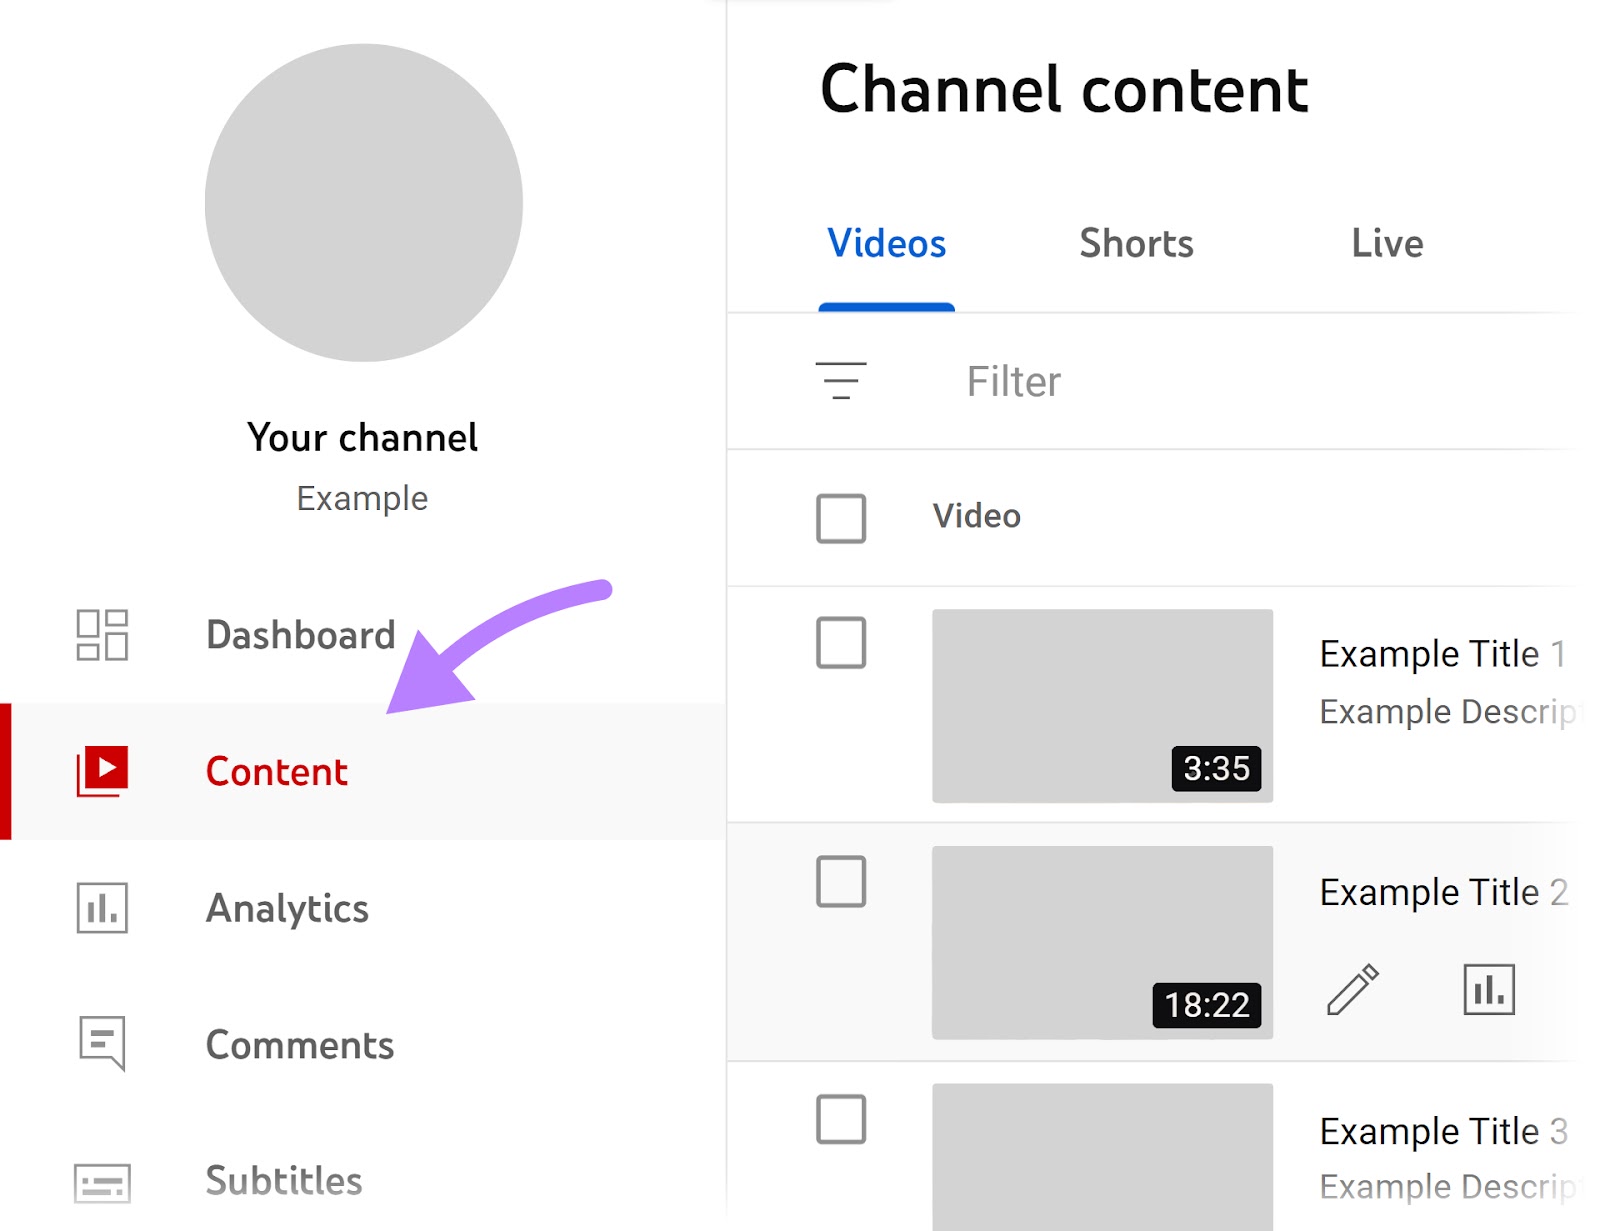 "Content" selected connected  the YouTube Studio dashboard